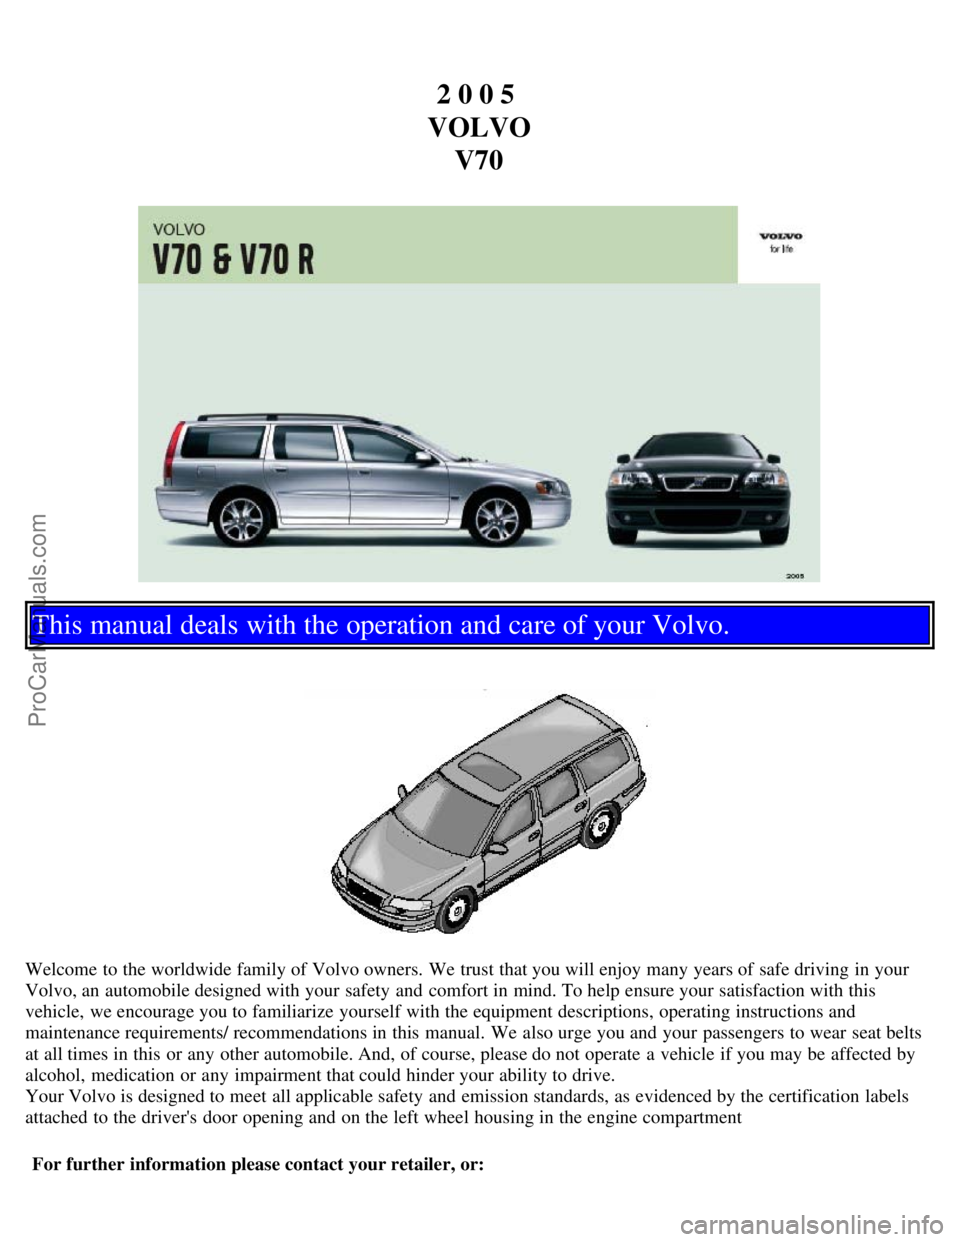 VOLVO V70 2005  Owners Manual 2 0 0 5 
VOLVO V70
This manual deals with the operation and care of your Volvo.
Welcome to the worldwide family of Volvo owners. We trust that you will enjoy many years of safe driving in your
Volvo, 